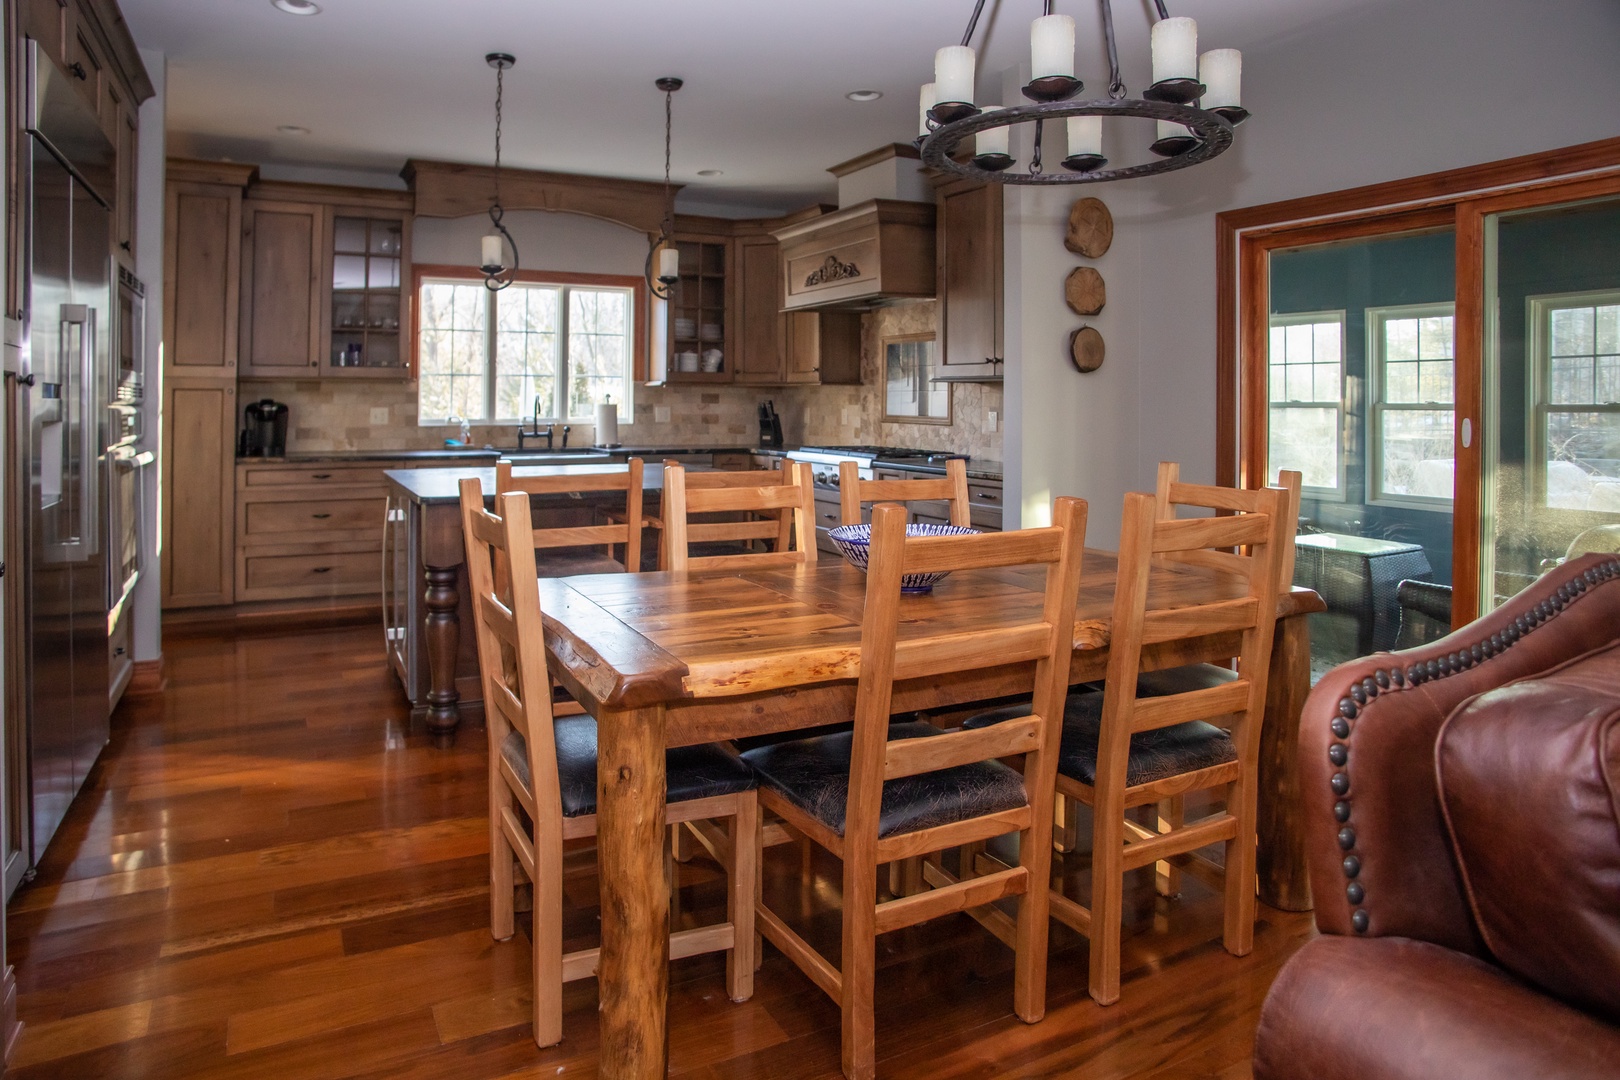 The Moose Lodge’s dine-in kitchen is ideal for large family gatherings.